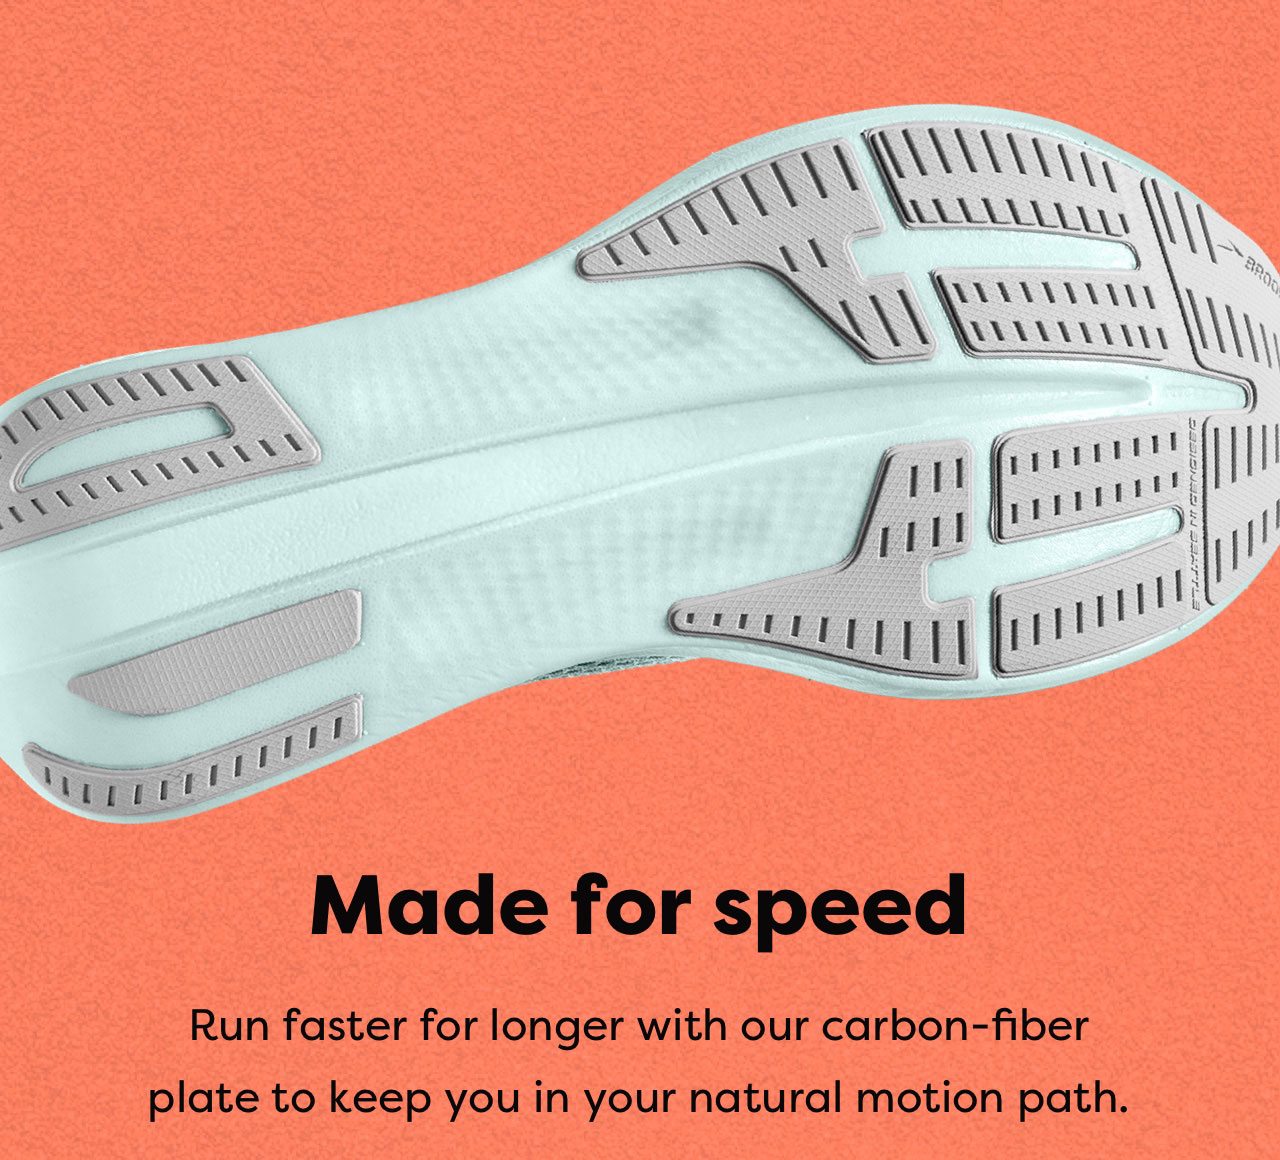 Made for speed | Run faster for longer with our carbon-fiber plate to keep you in your natural motion path.